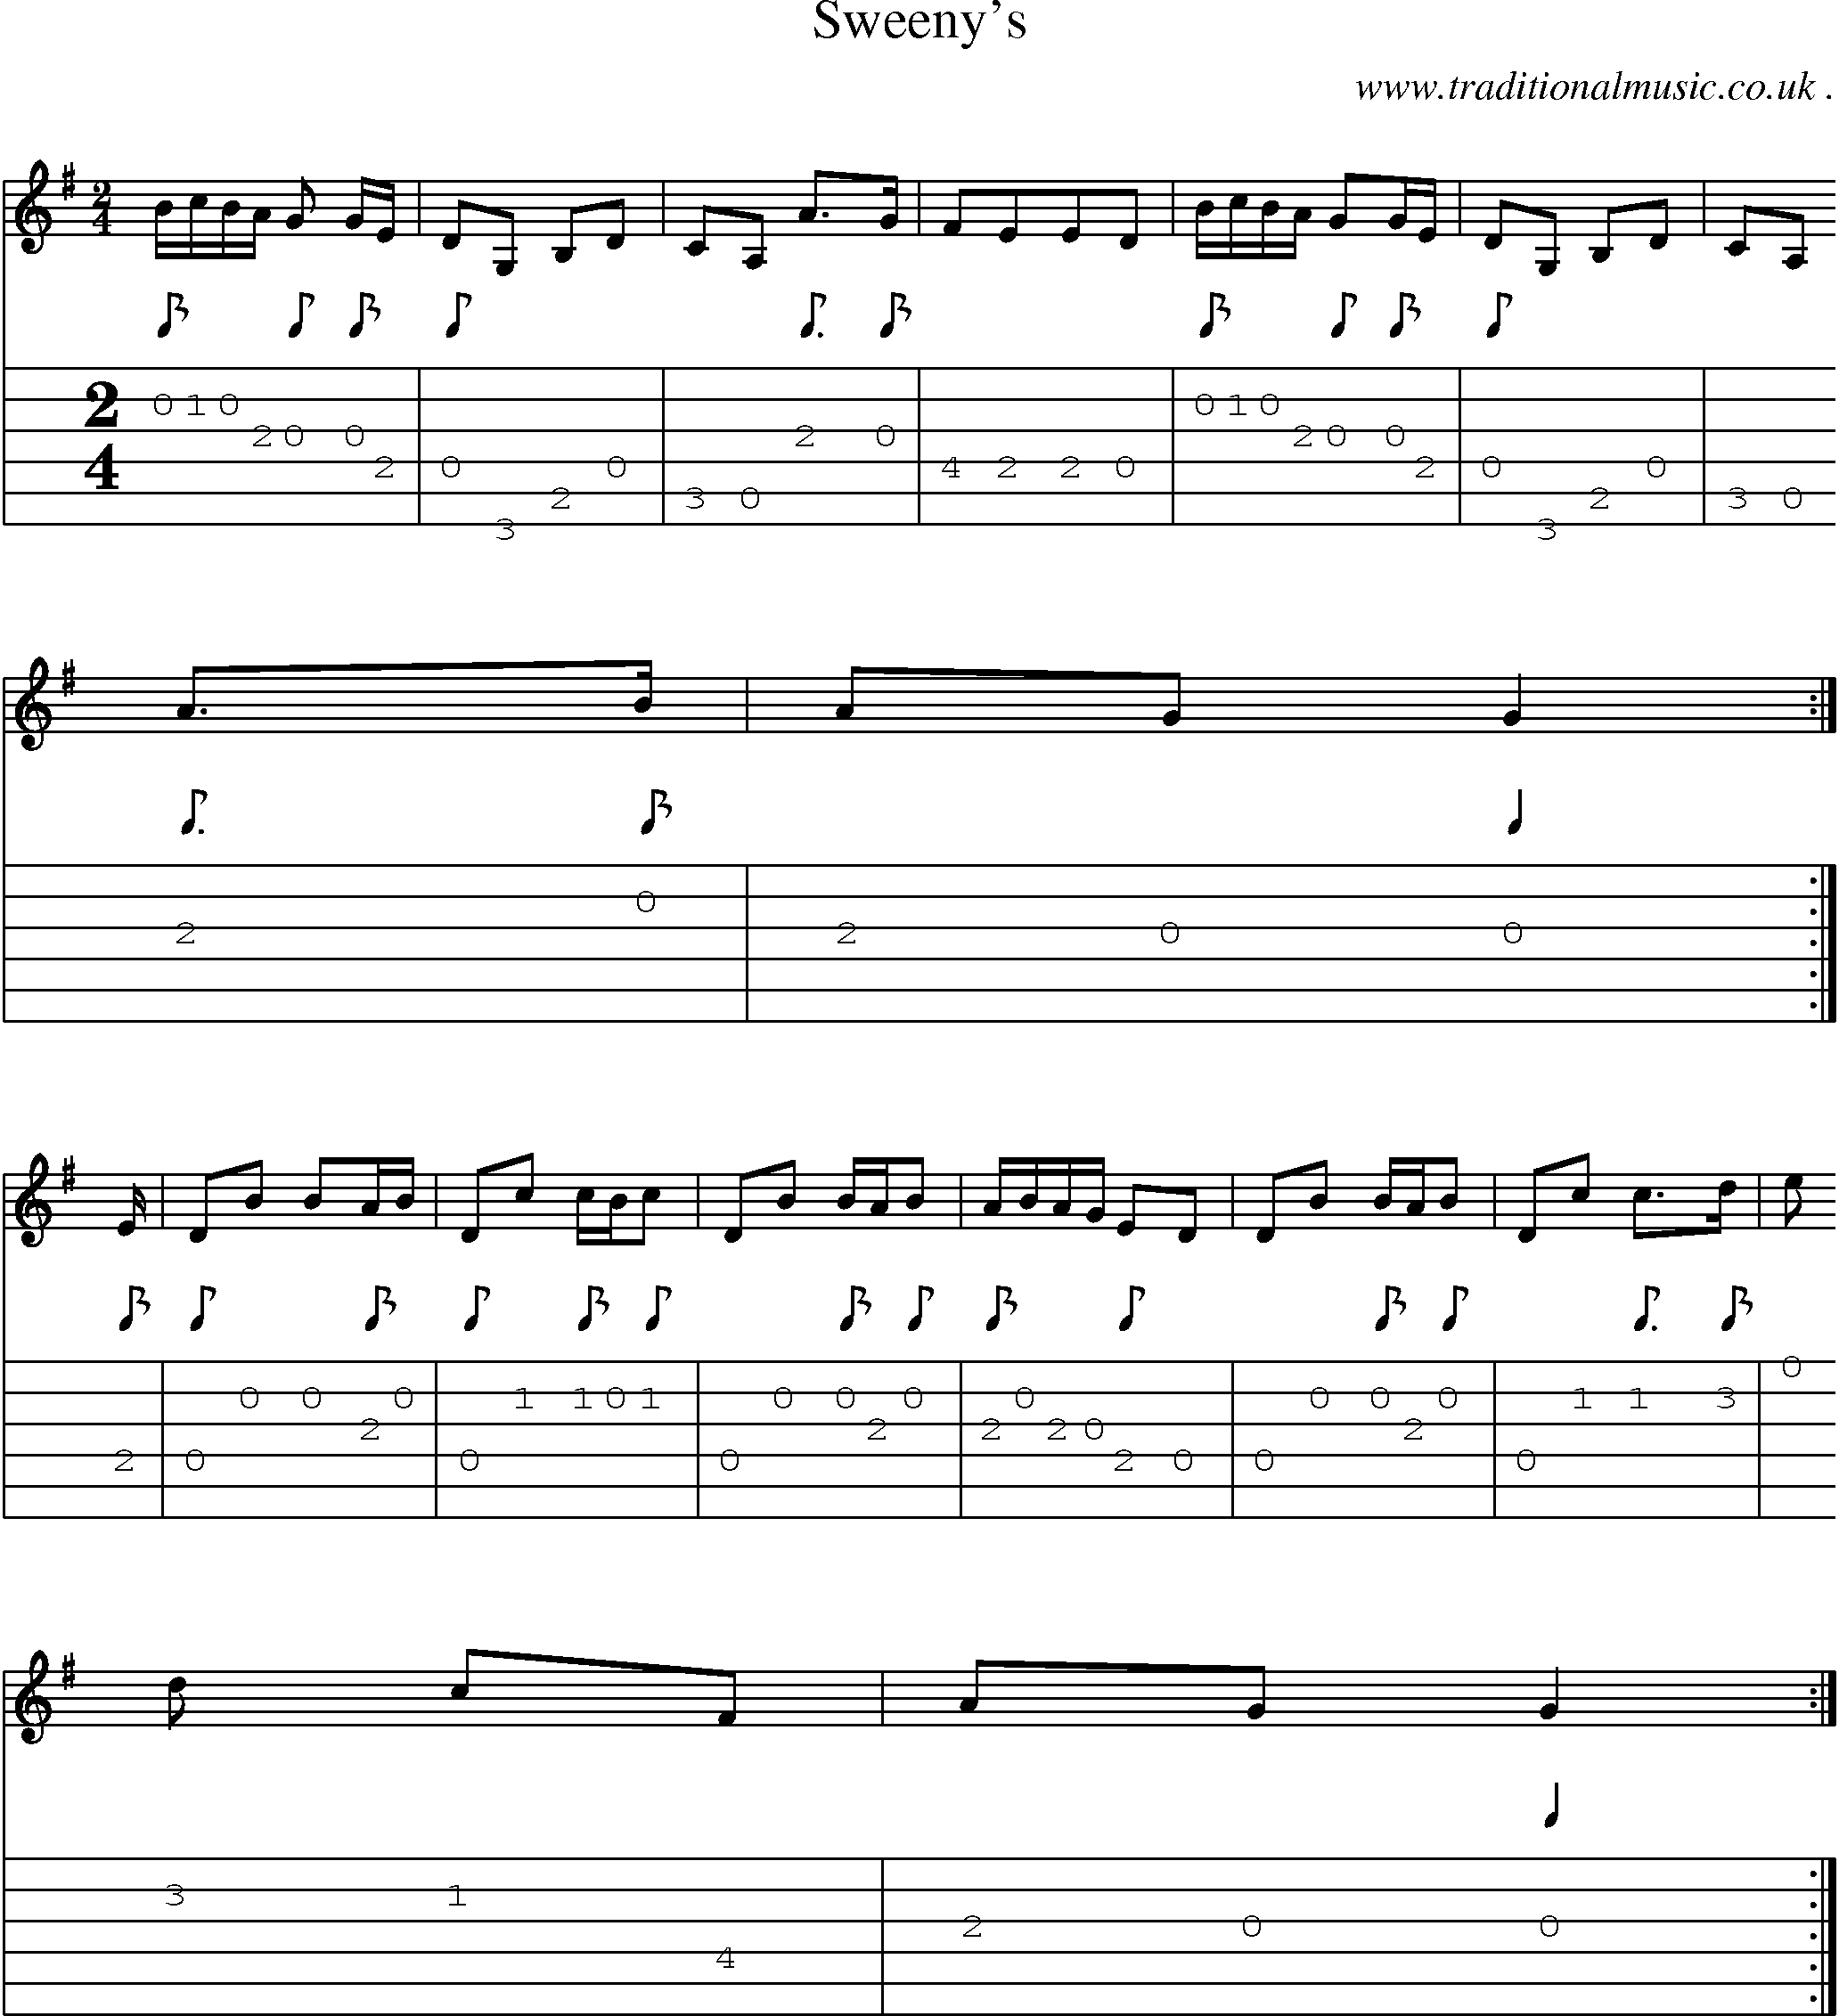 Sheet-Music and Guitar Tabs for Sweenys